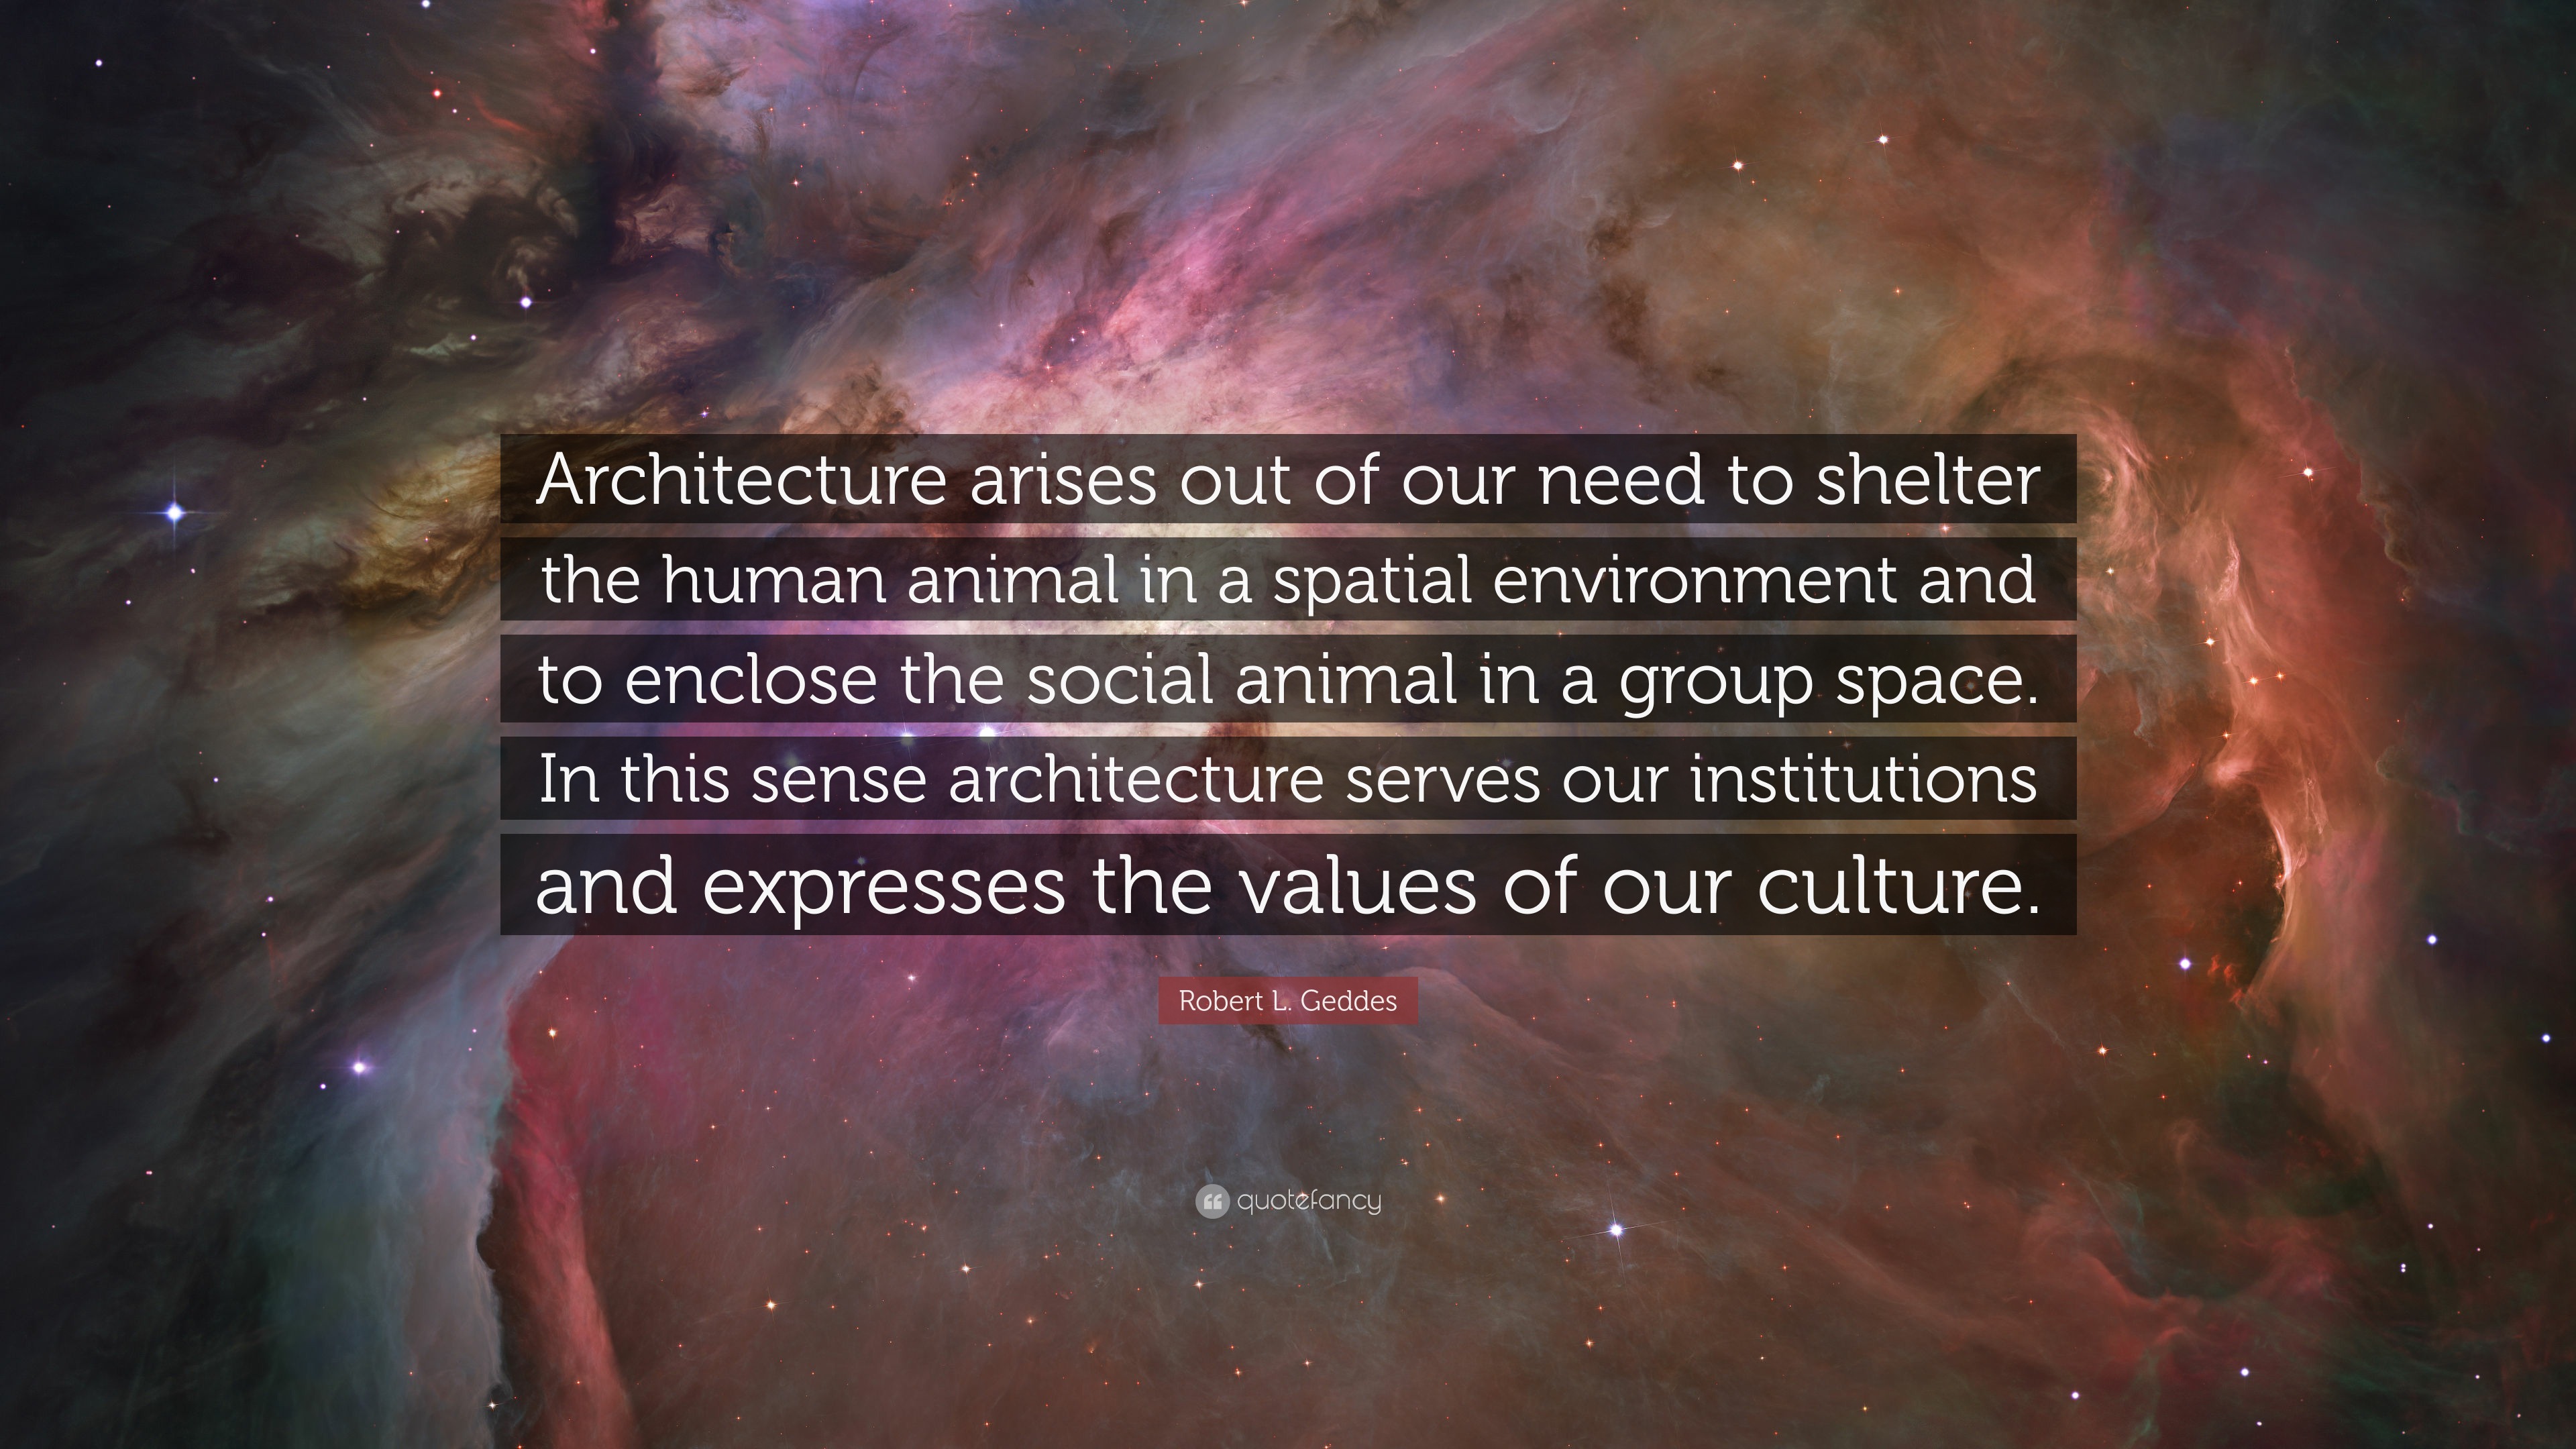 Robert L. Geddes Quote: “Architecture arises out of our need to shelter the  human animal in a spatial environment and to enclose the social anima...”